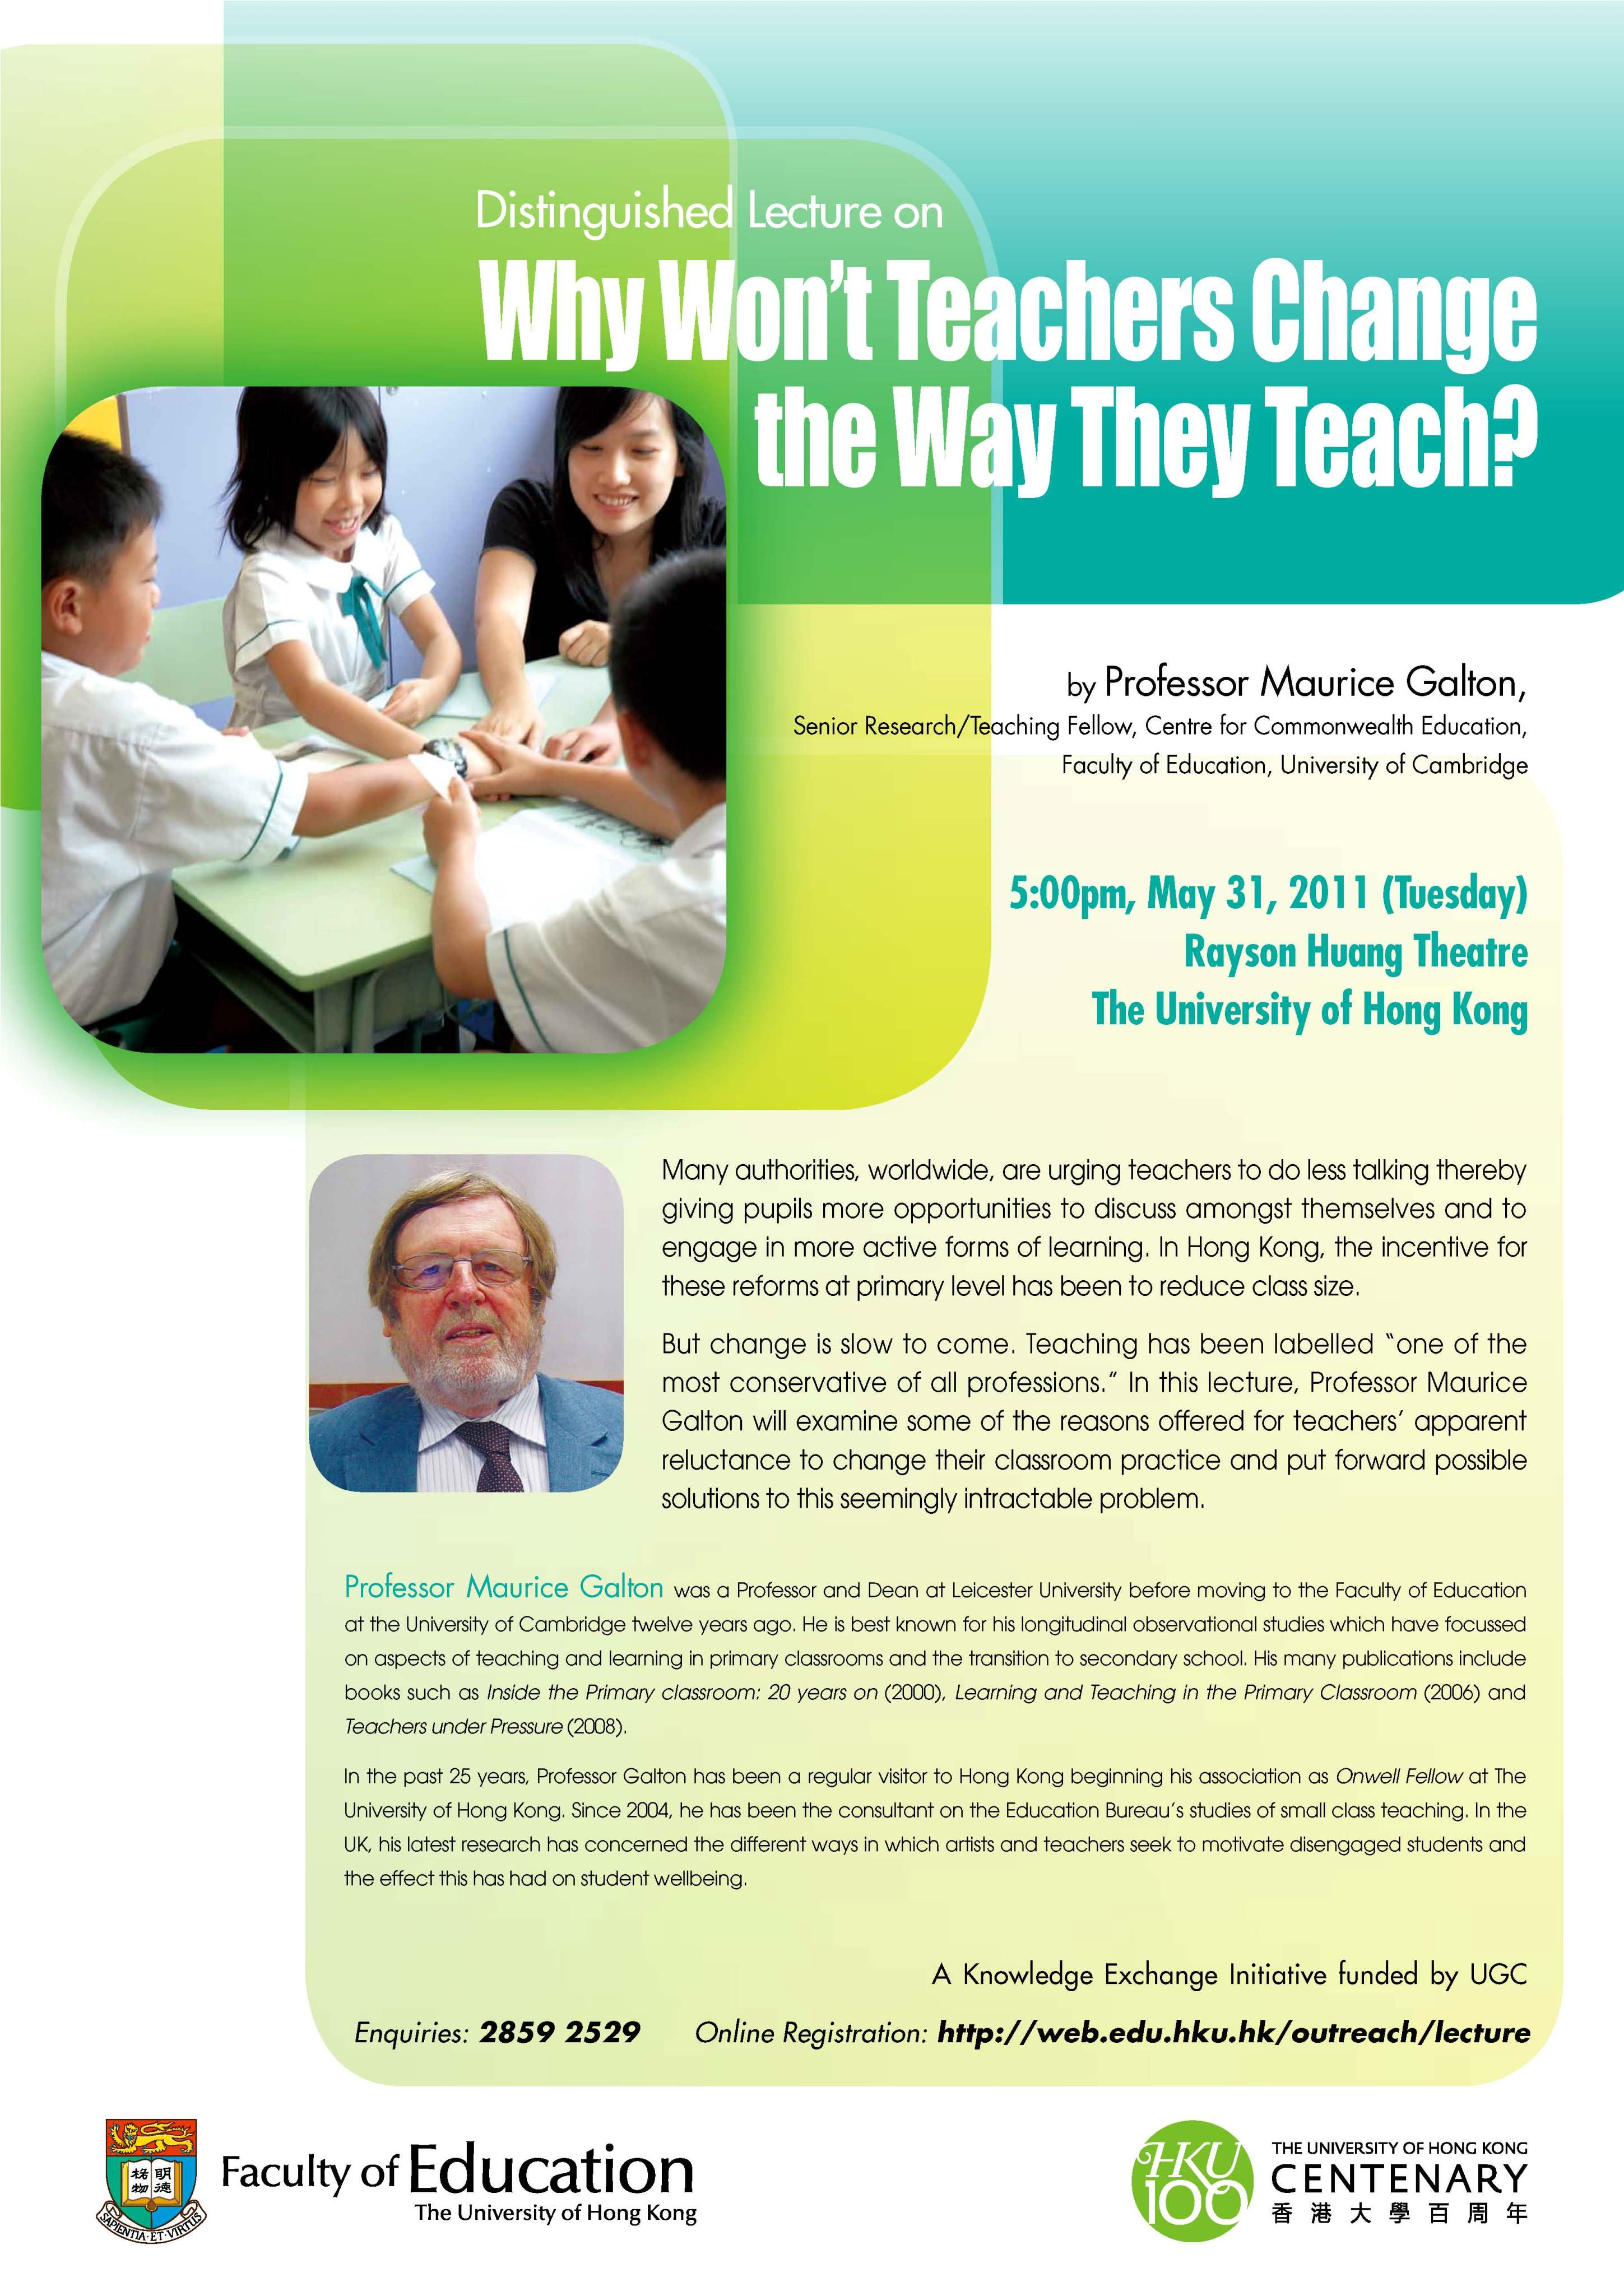 Distinguished Lecture on Why Won’t Teachers Change the Way They Teach?